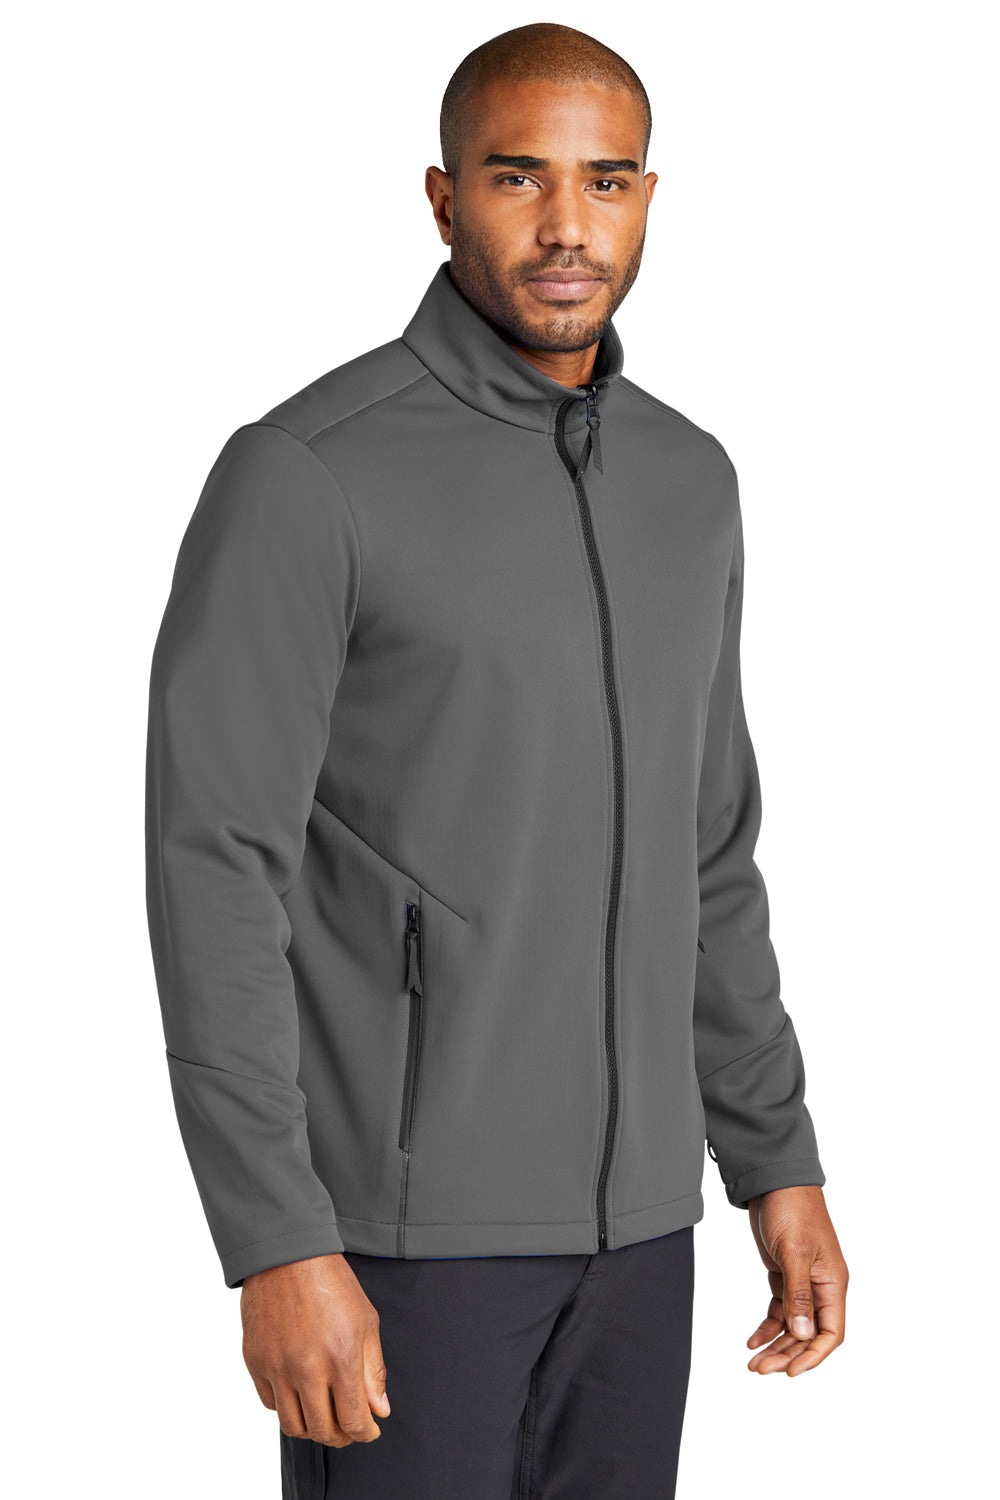 Port Authority J921 Collective Tech Full Zip Soft Shell Jacket Graphite Grey 3Q